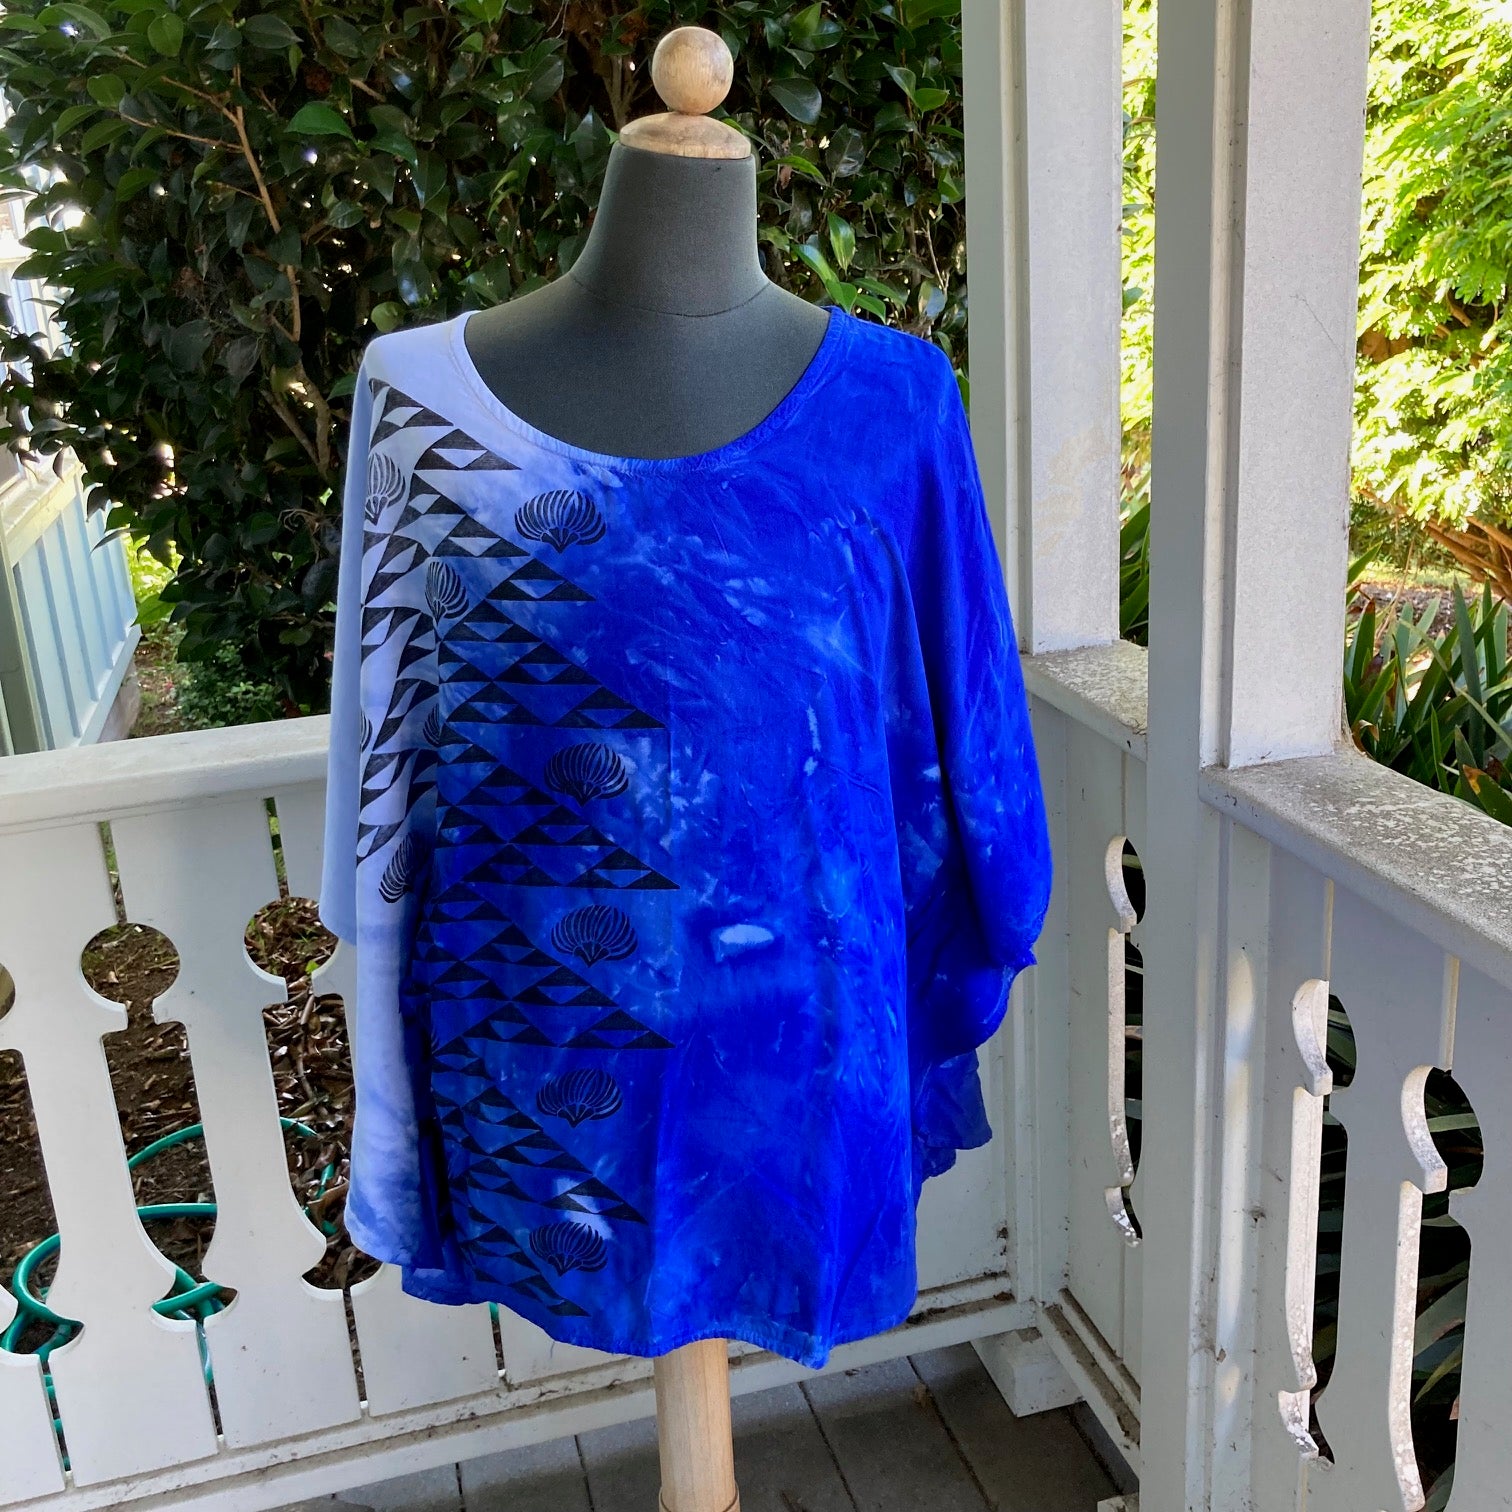 SIZE 2XL  Ohe Kapala Blouse in Brilliant Blue with Mauna and Lehua